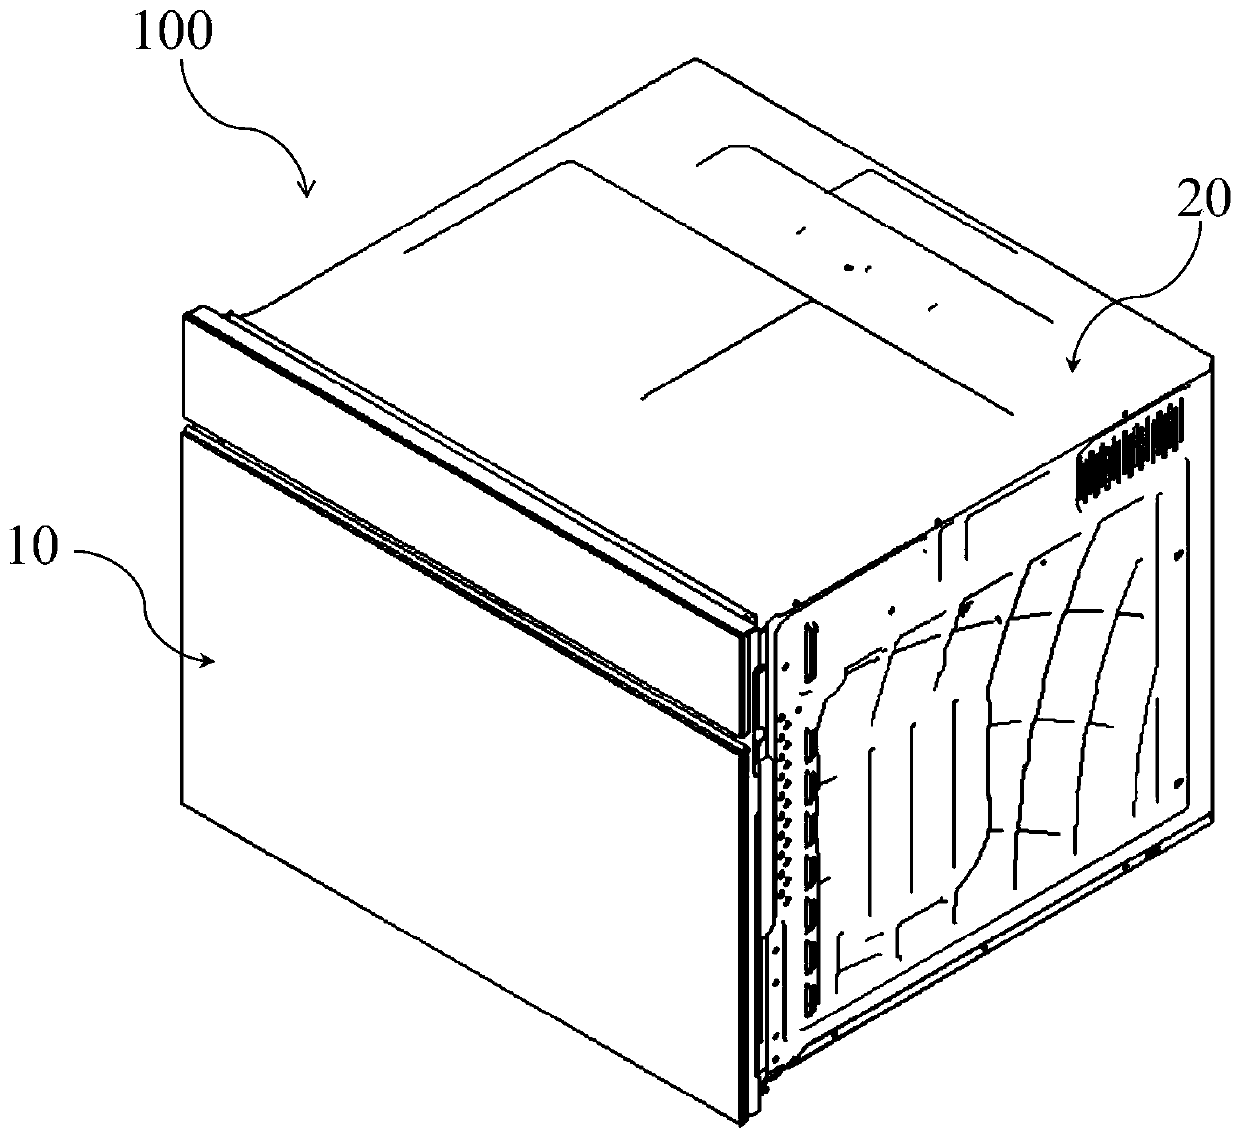 Oven door assembly for embedded oven and embedded oven with oven door assembly